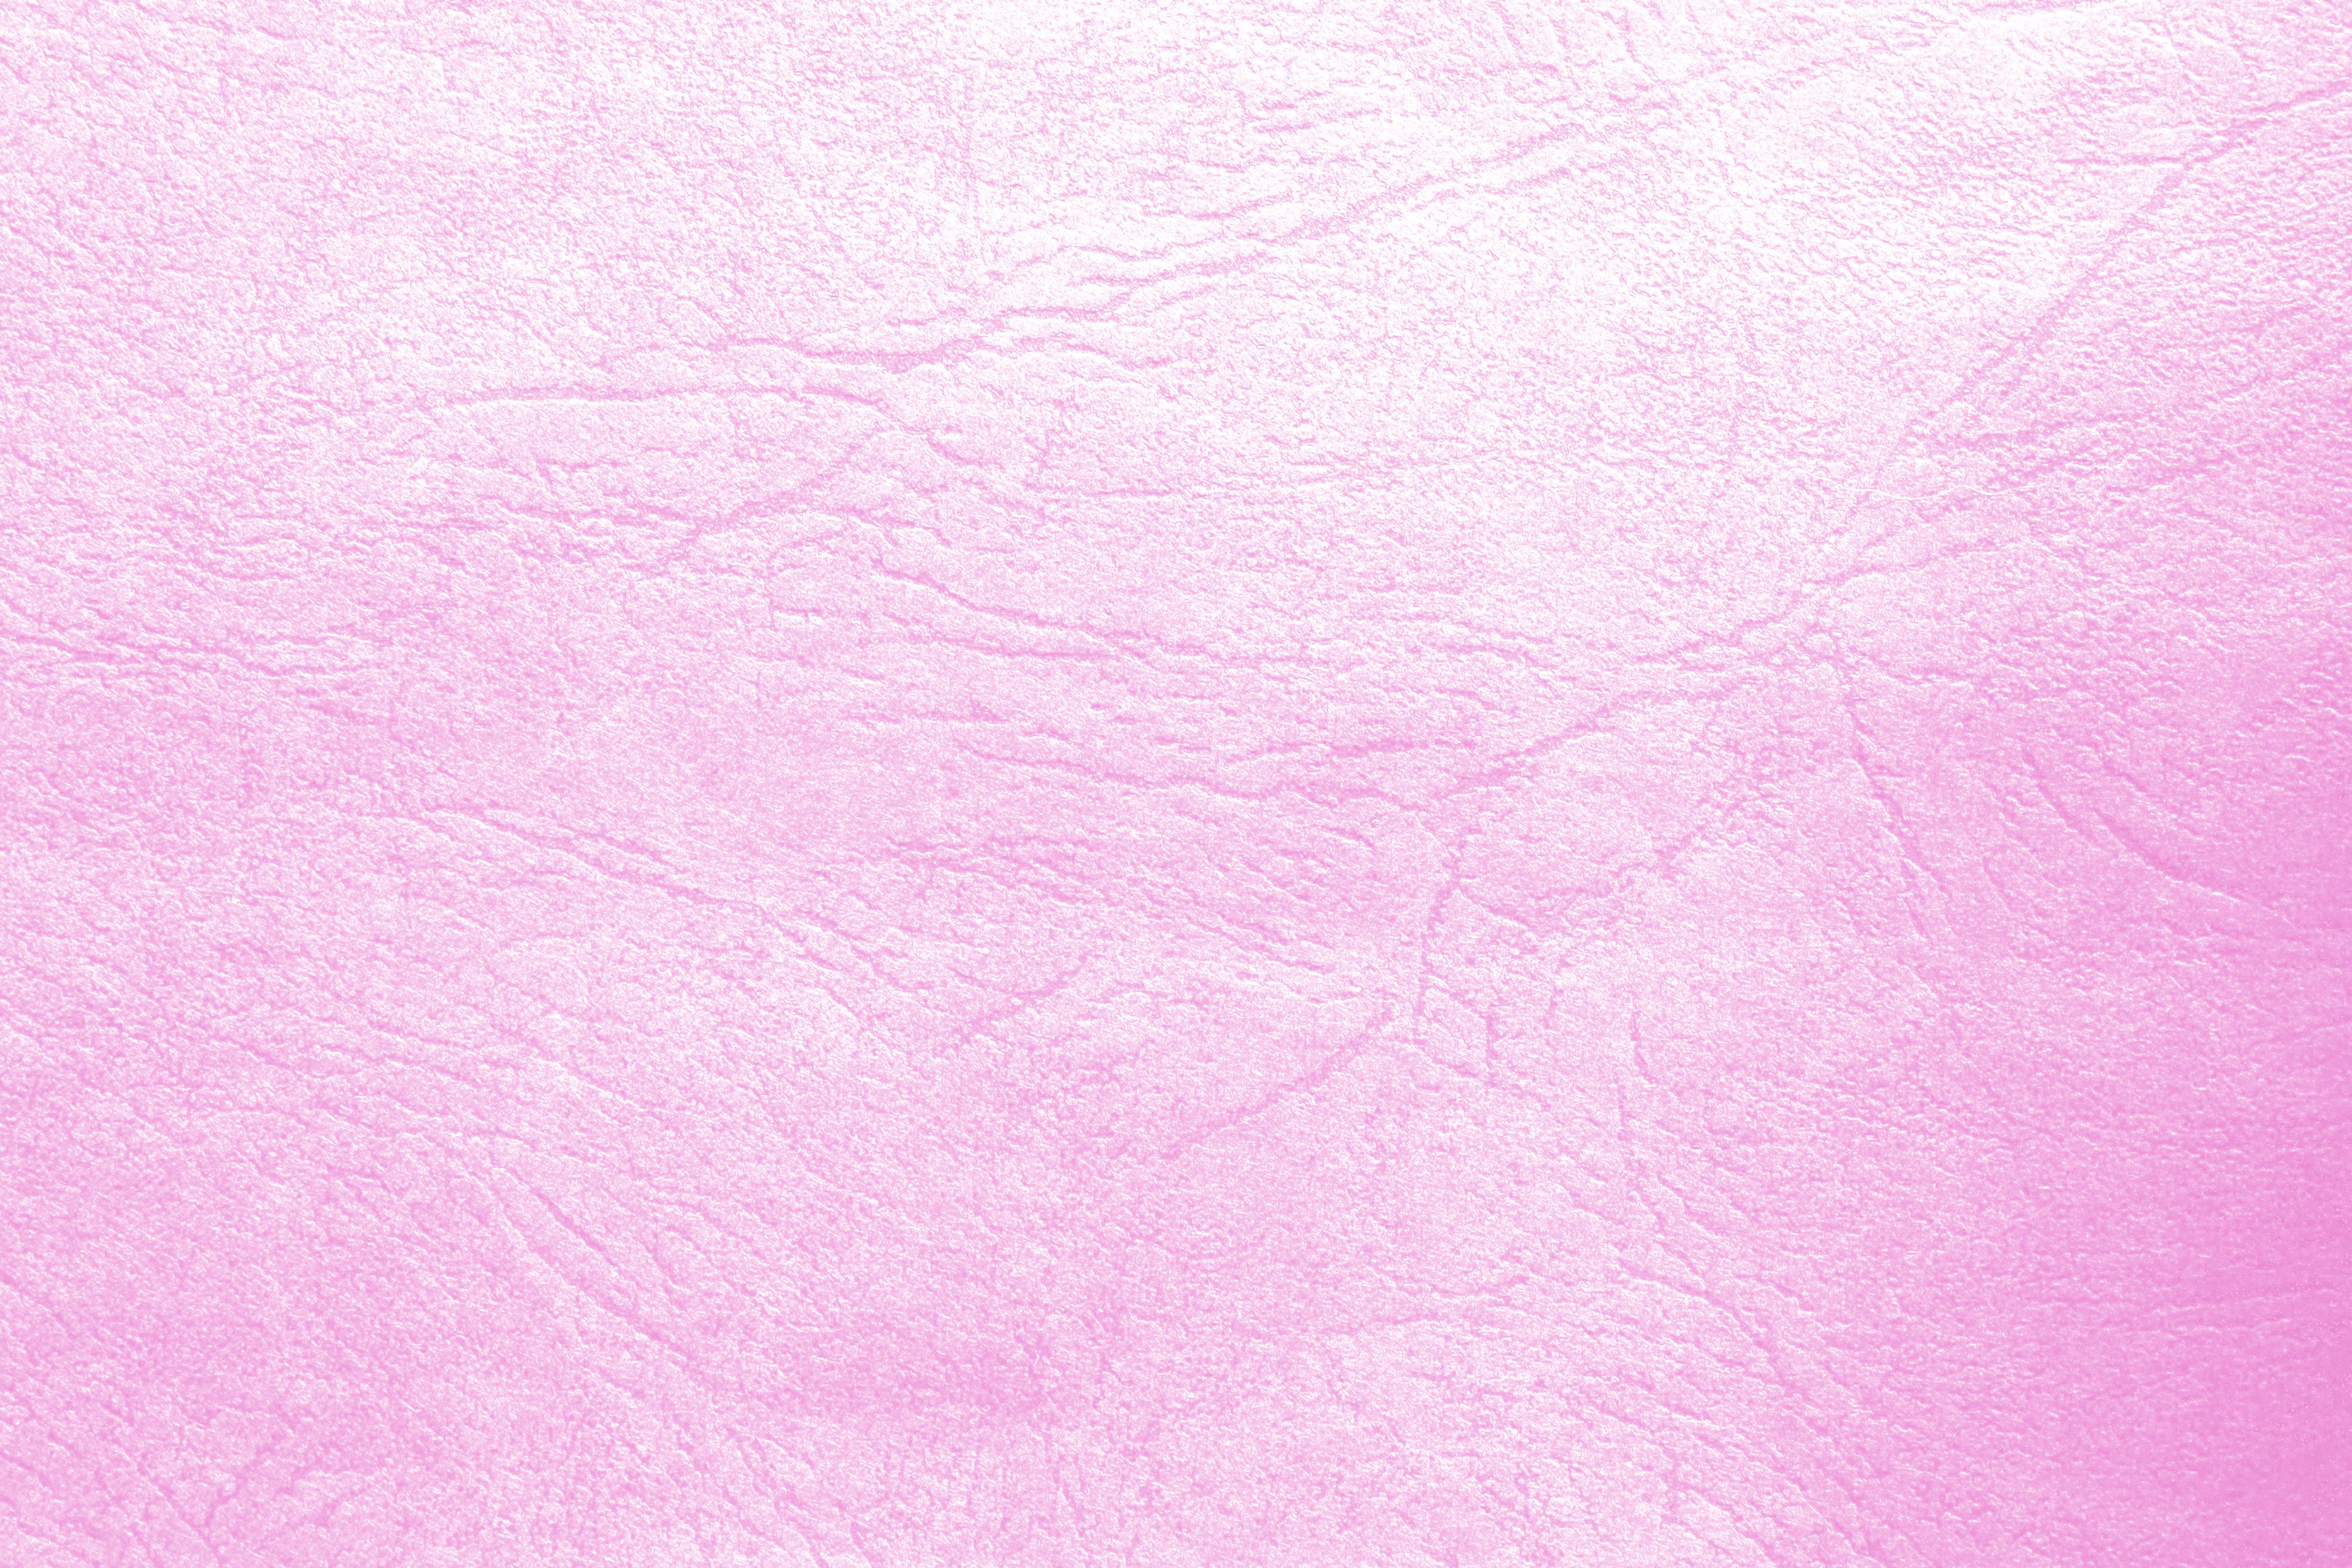 Light Pink Wallpaper Images amp Pictures   Becuo